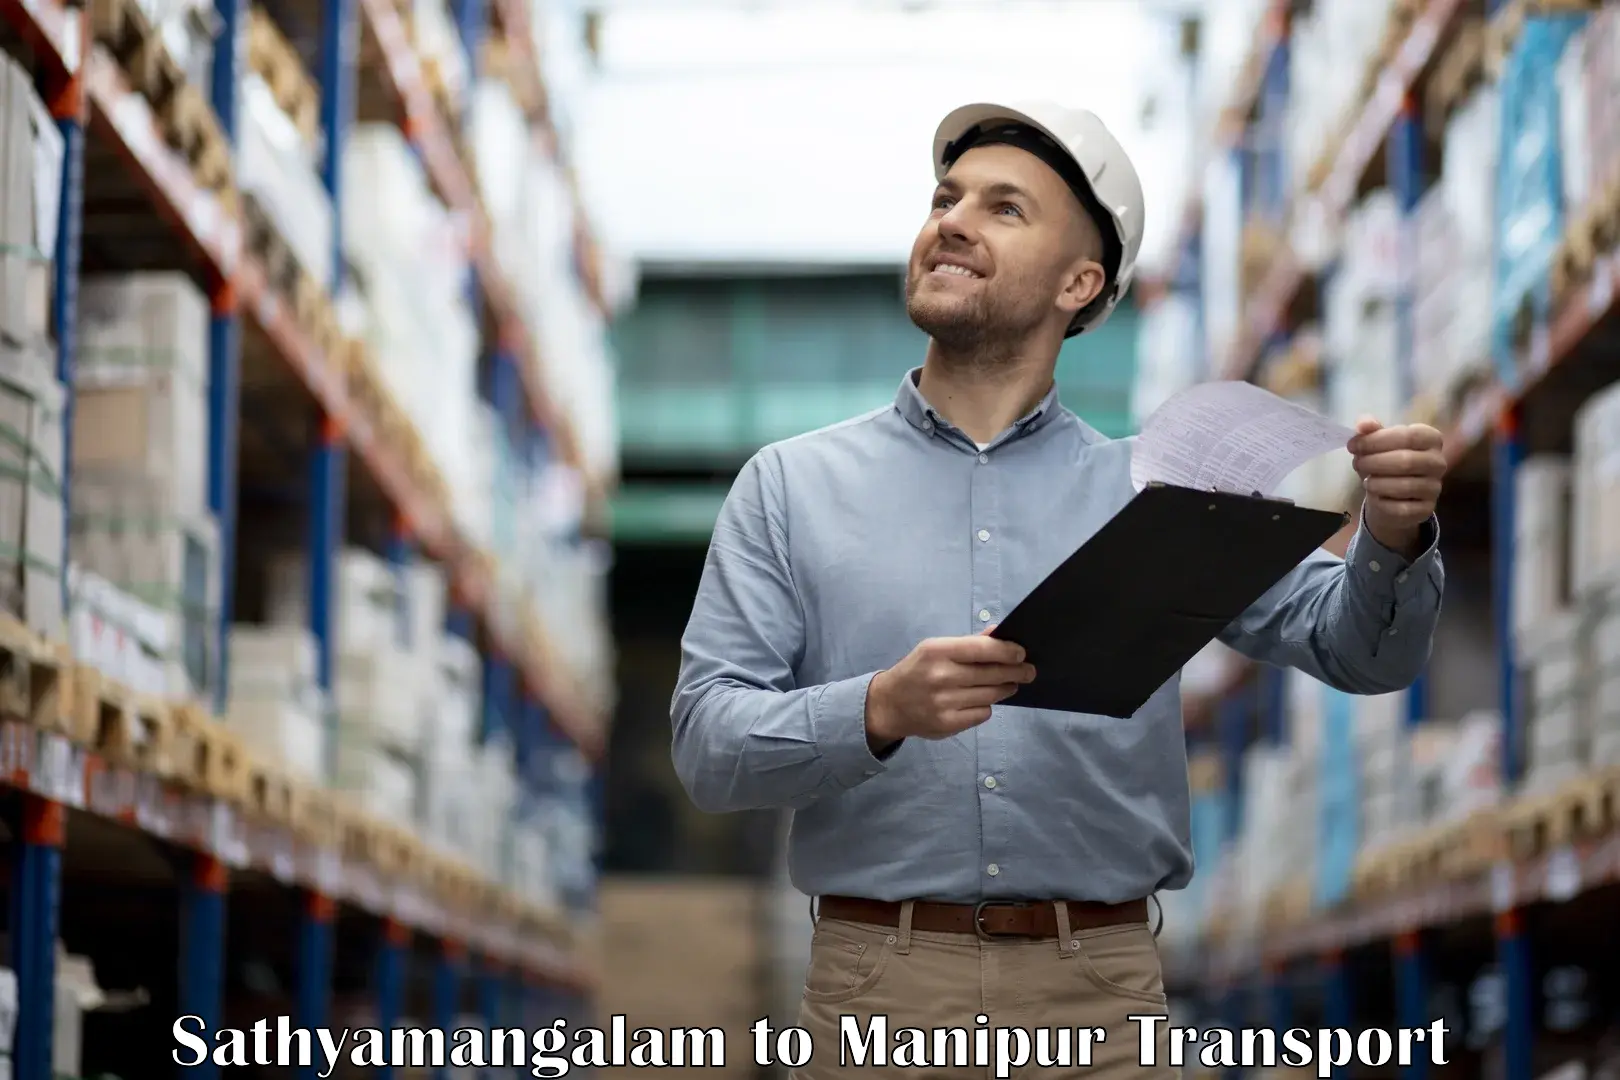 Goods delivery service Sathyamangalam to Manipur